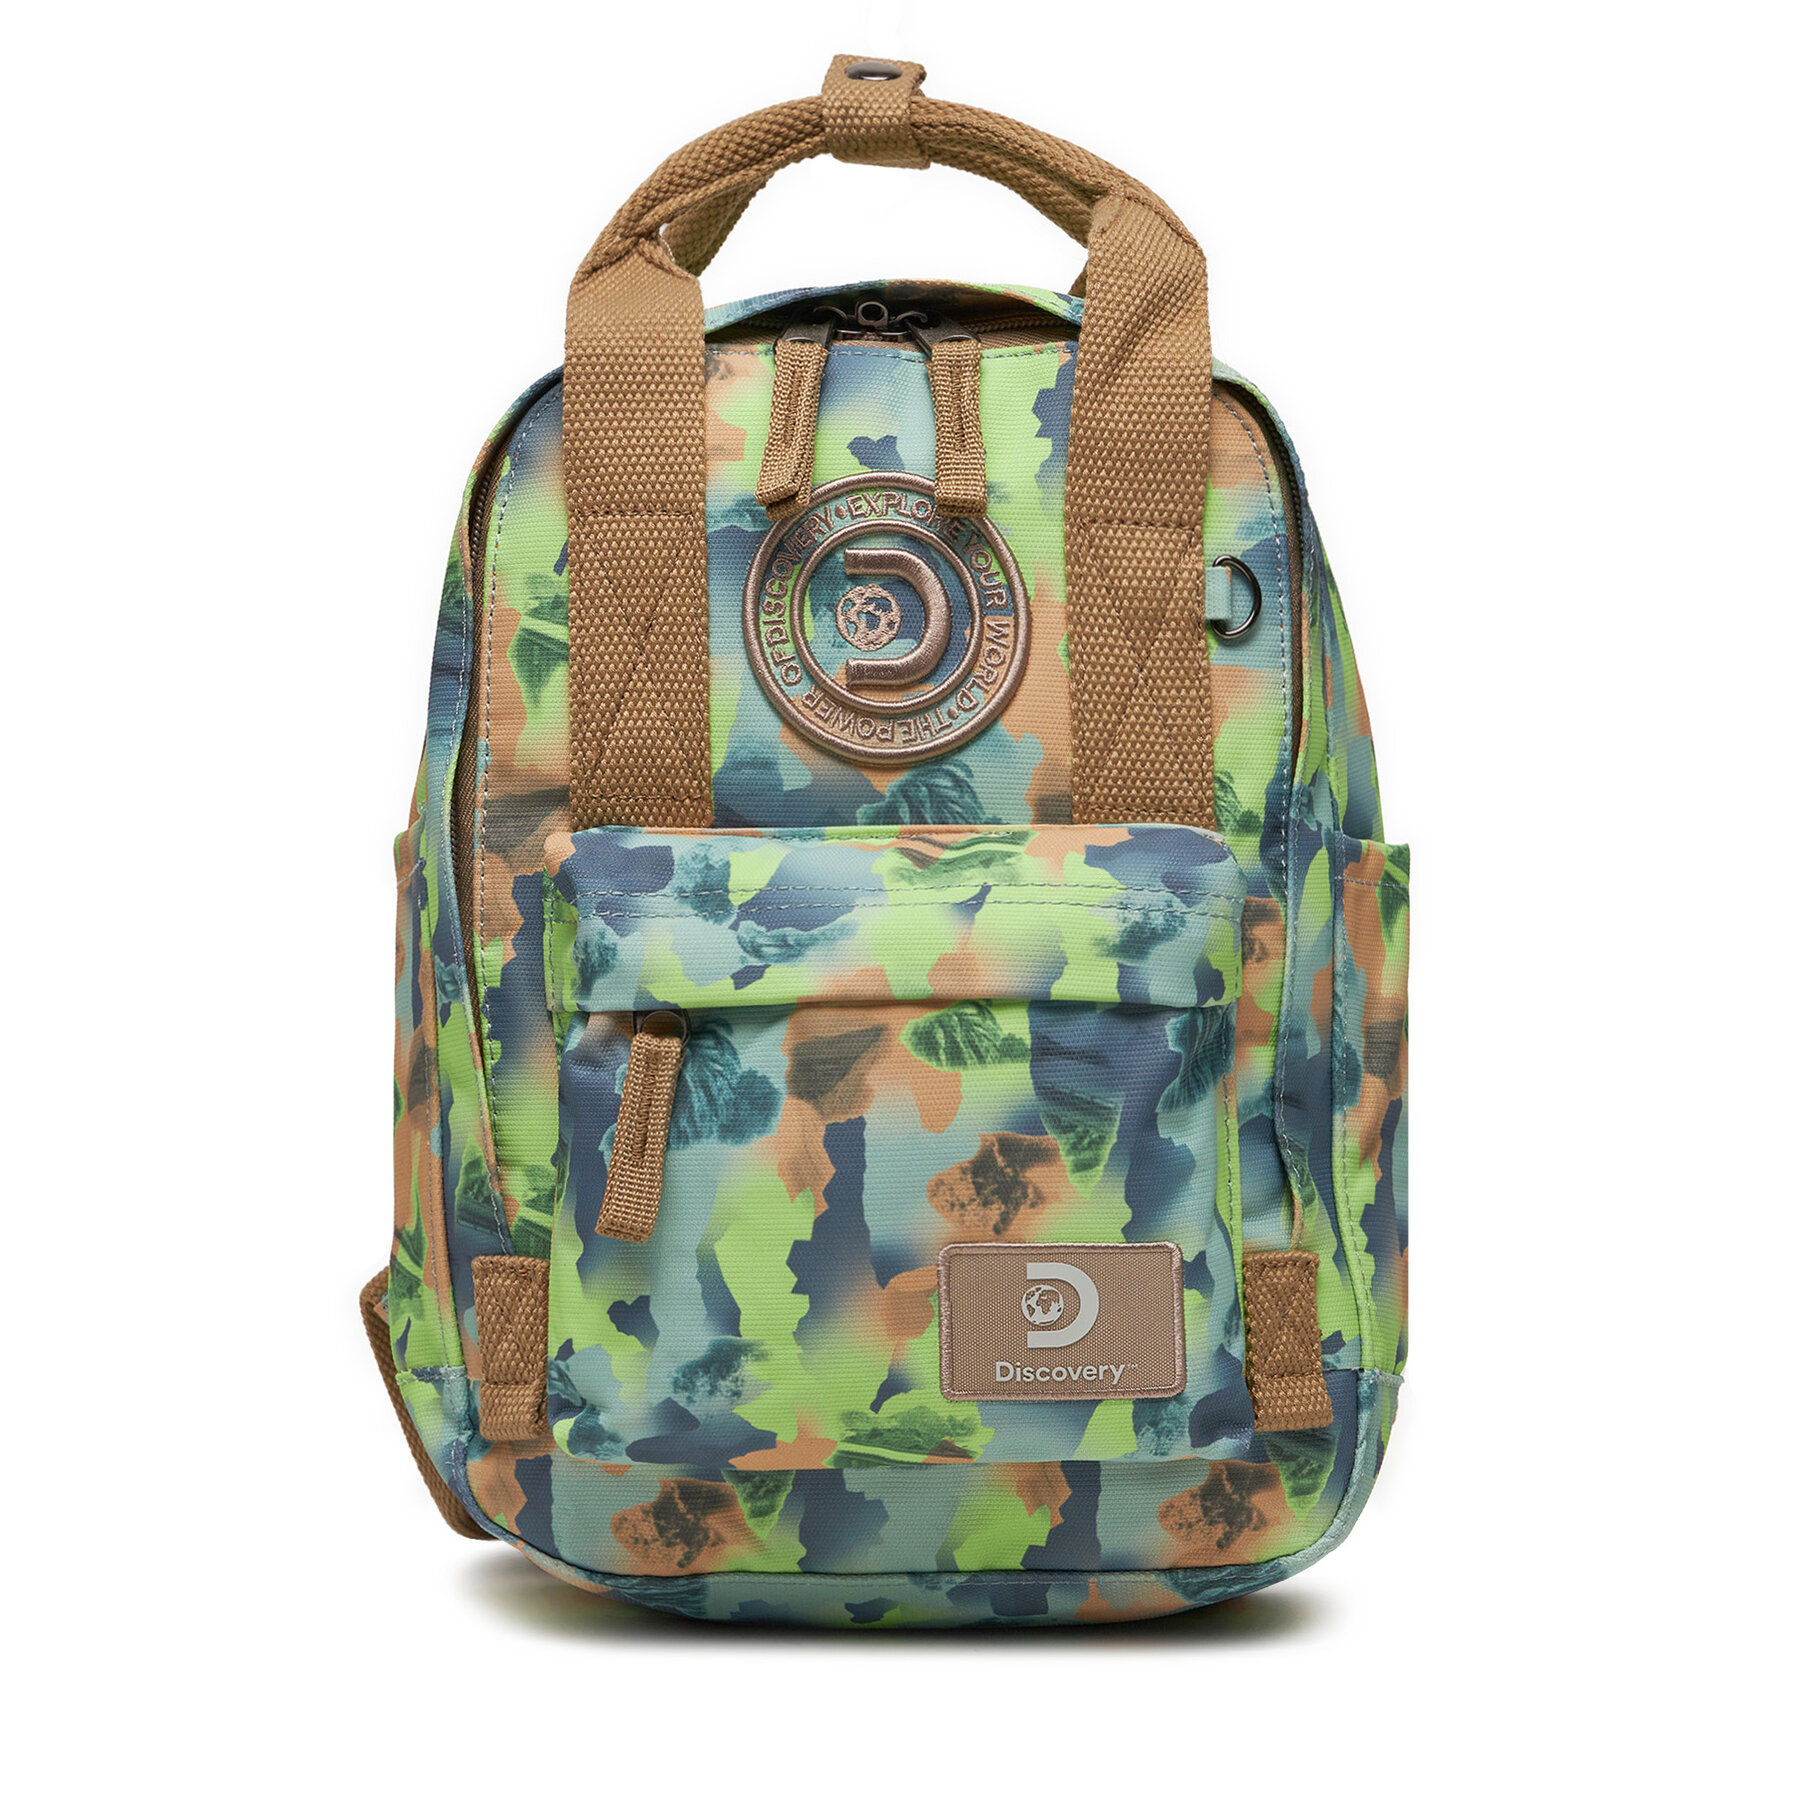 Rucksack Discovery Small D00811.21 Green Camo von Discovery